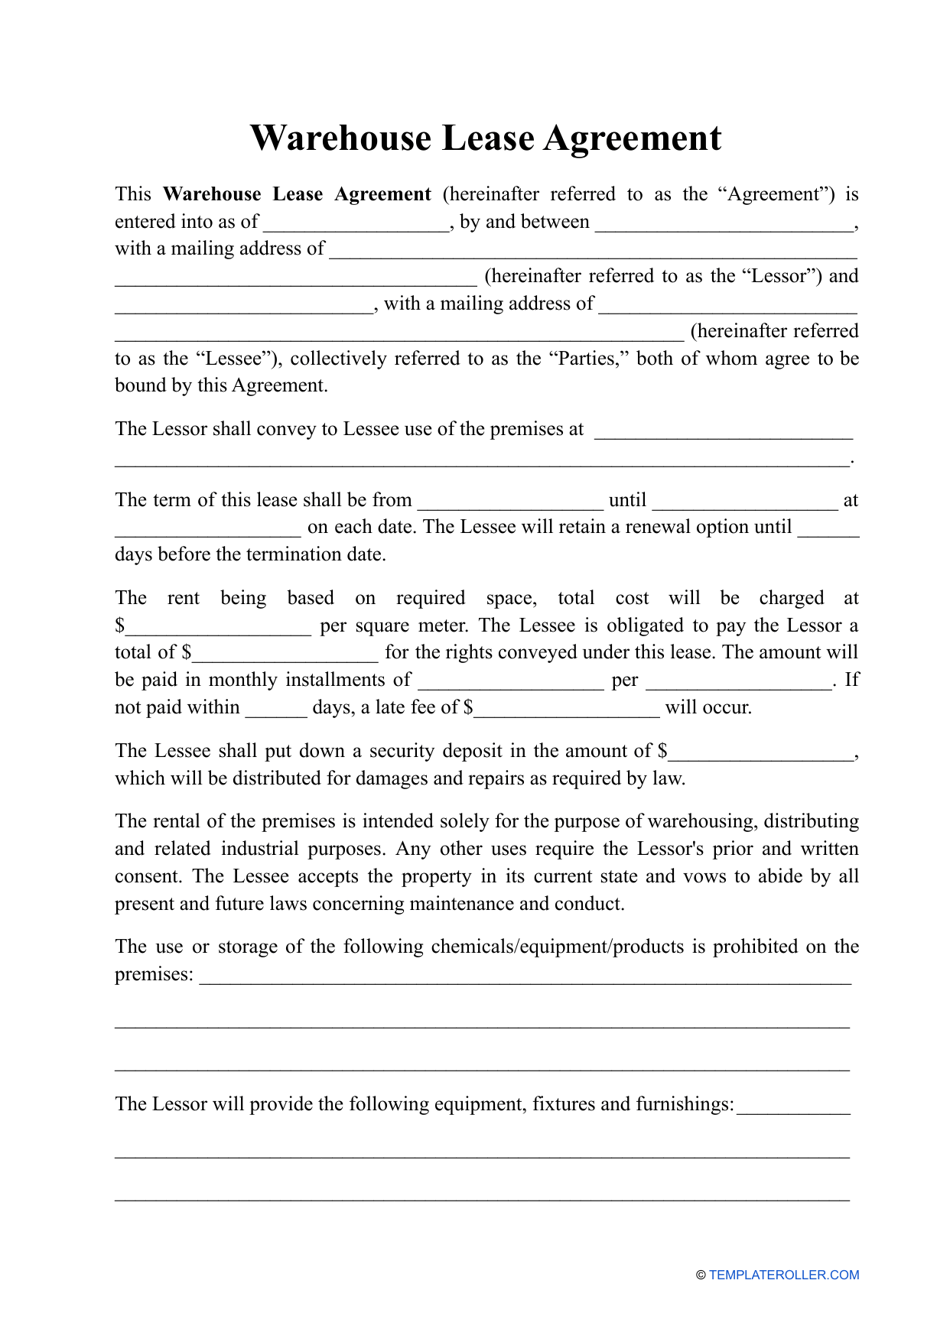 Warehouse Lease Agreement Template Download Printable PDF Within boat slip rental agreement template